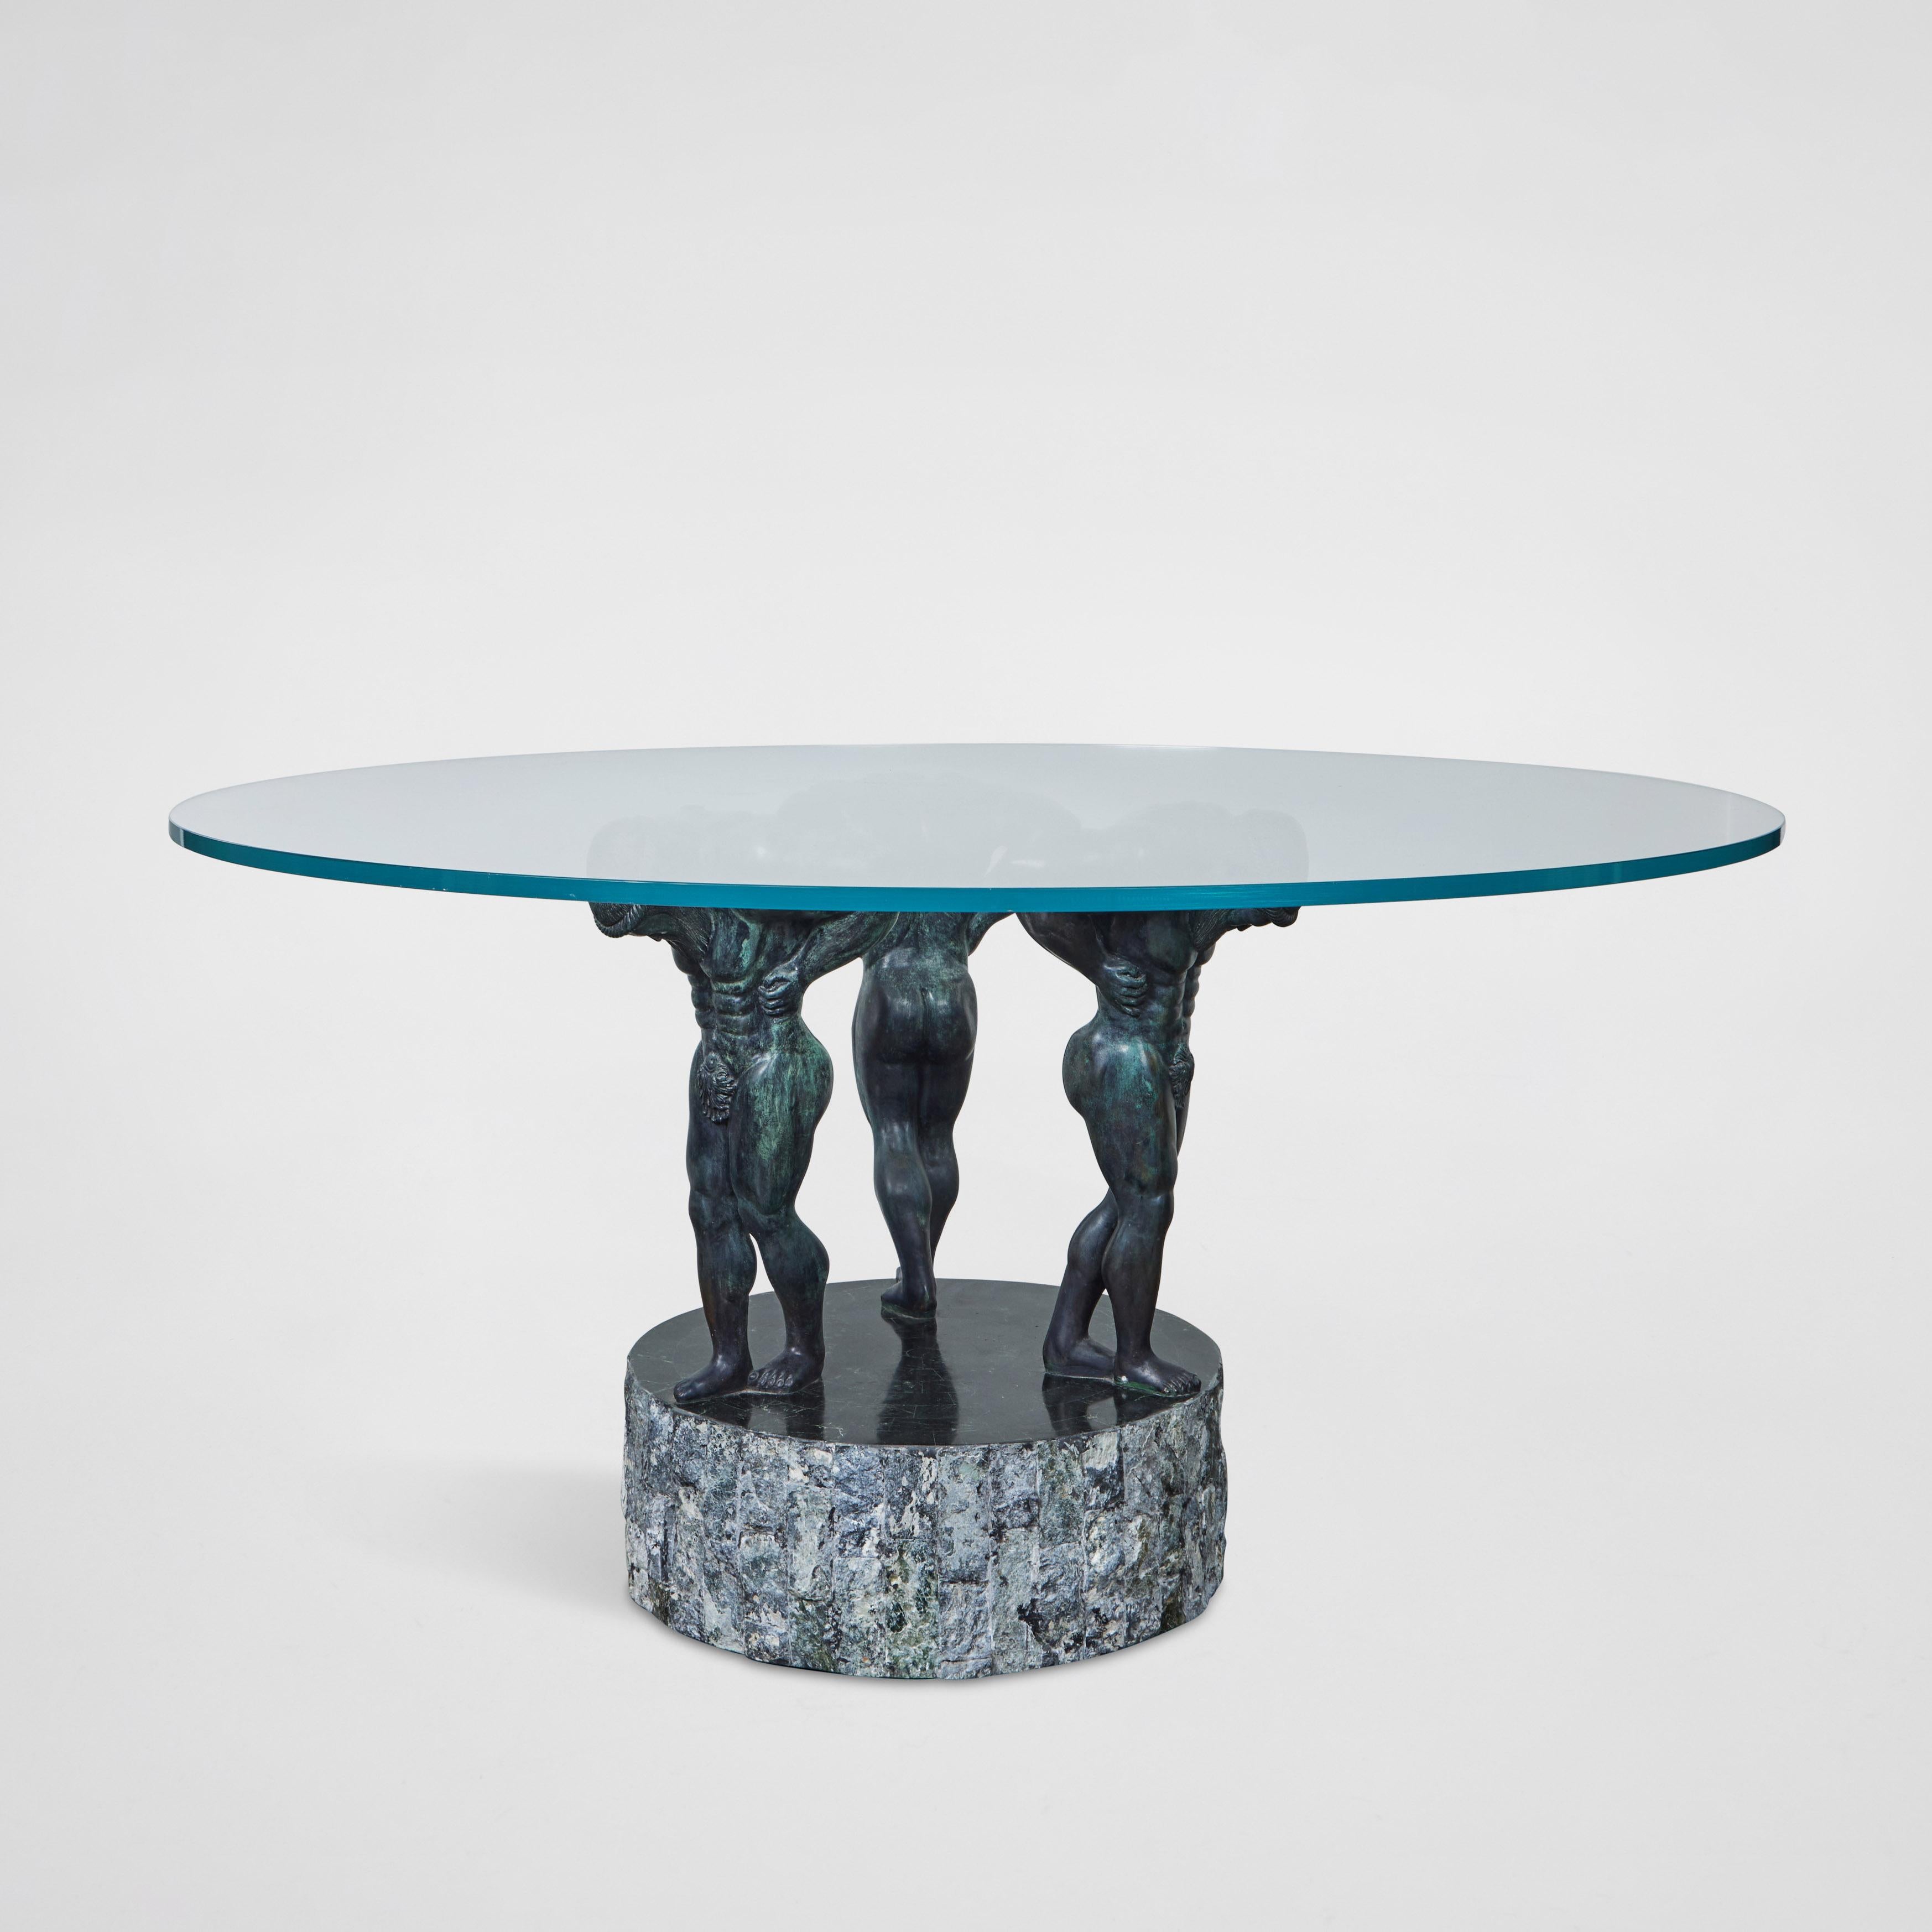 Rare and spectacular table base by Mastercraft, 1980s. The base is comprised of three bronze male figures in a Greco-Roman style standing atop a chiseled, tessillated stone base. The base could be used as either a dining table or center table.